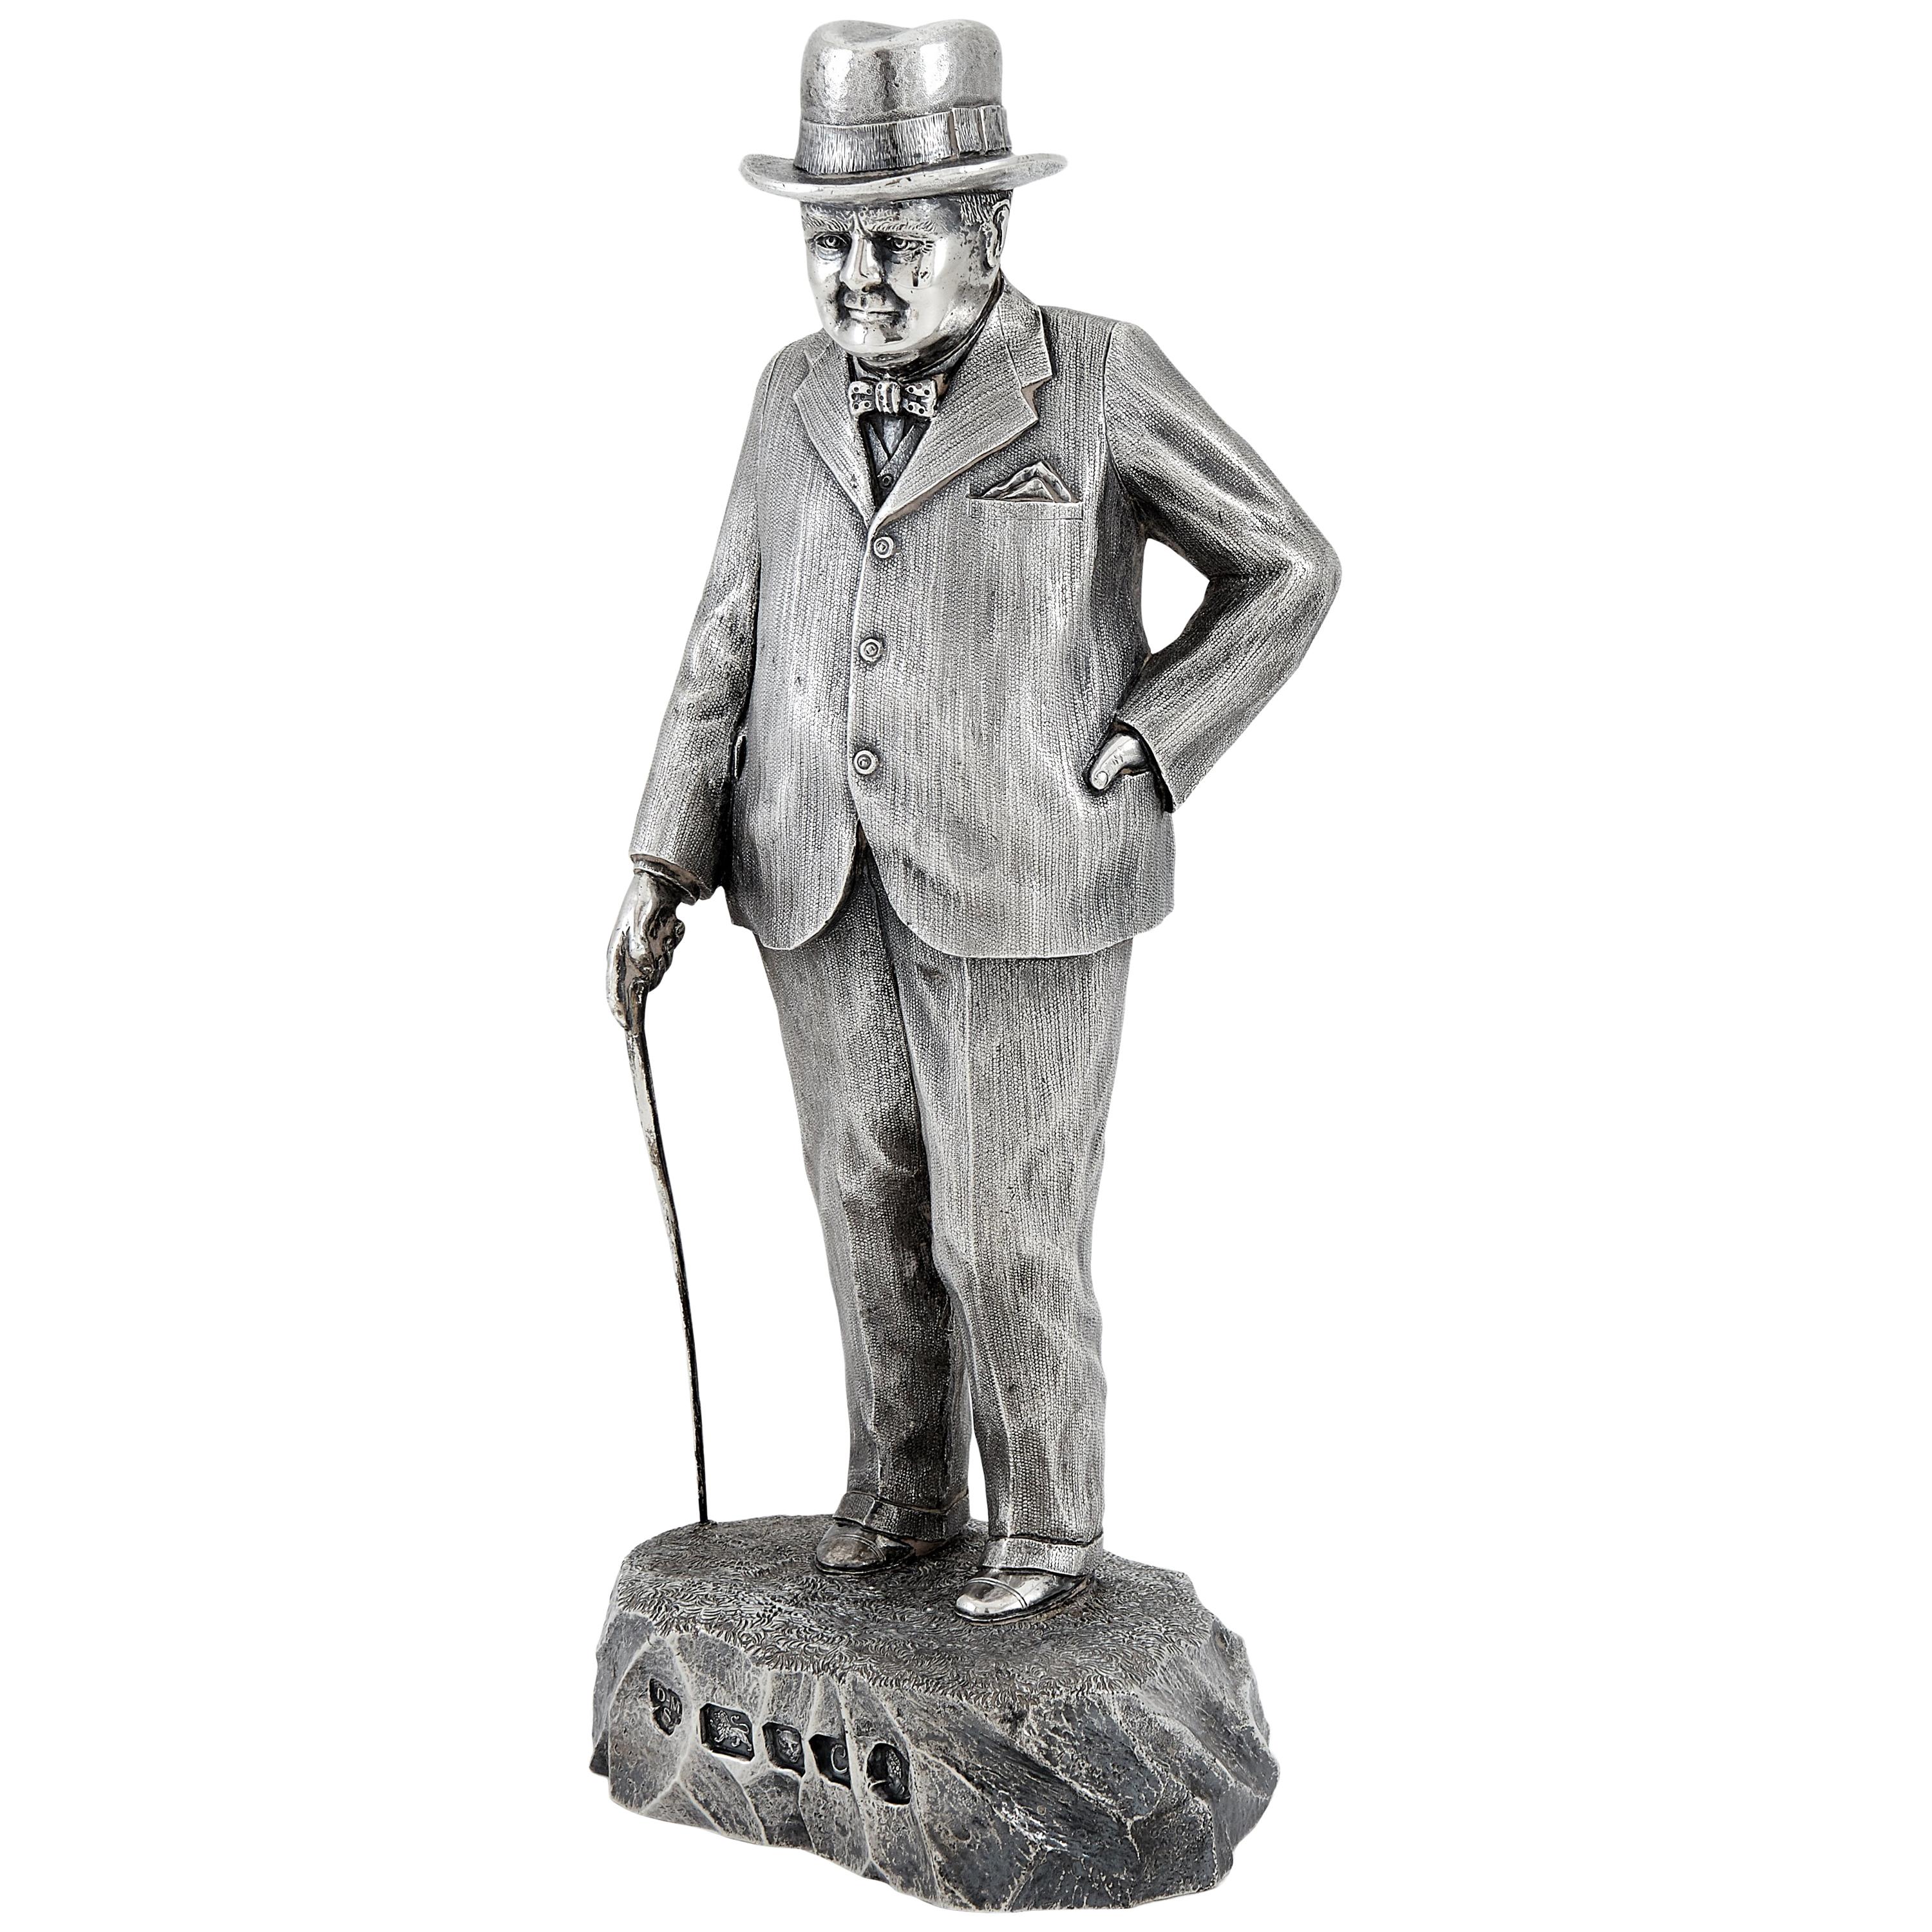 Extremely Heavy Cast Silver Statuette of Prime Minister Winston Churchill